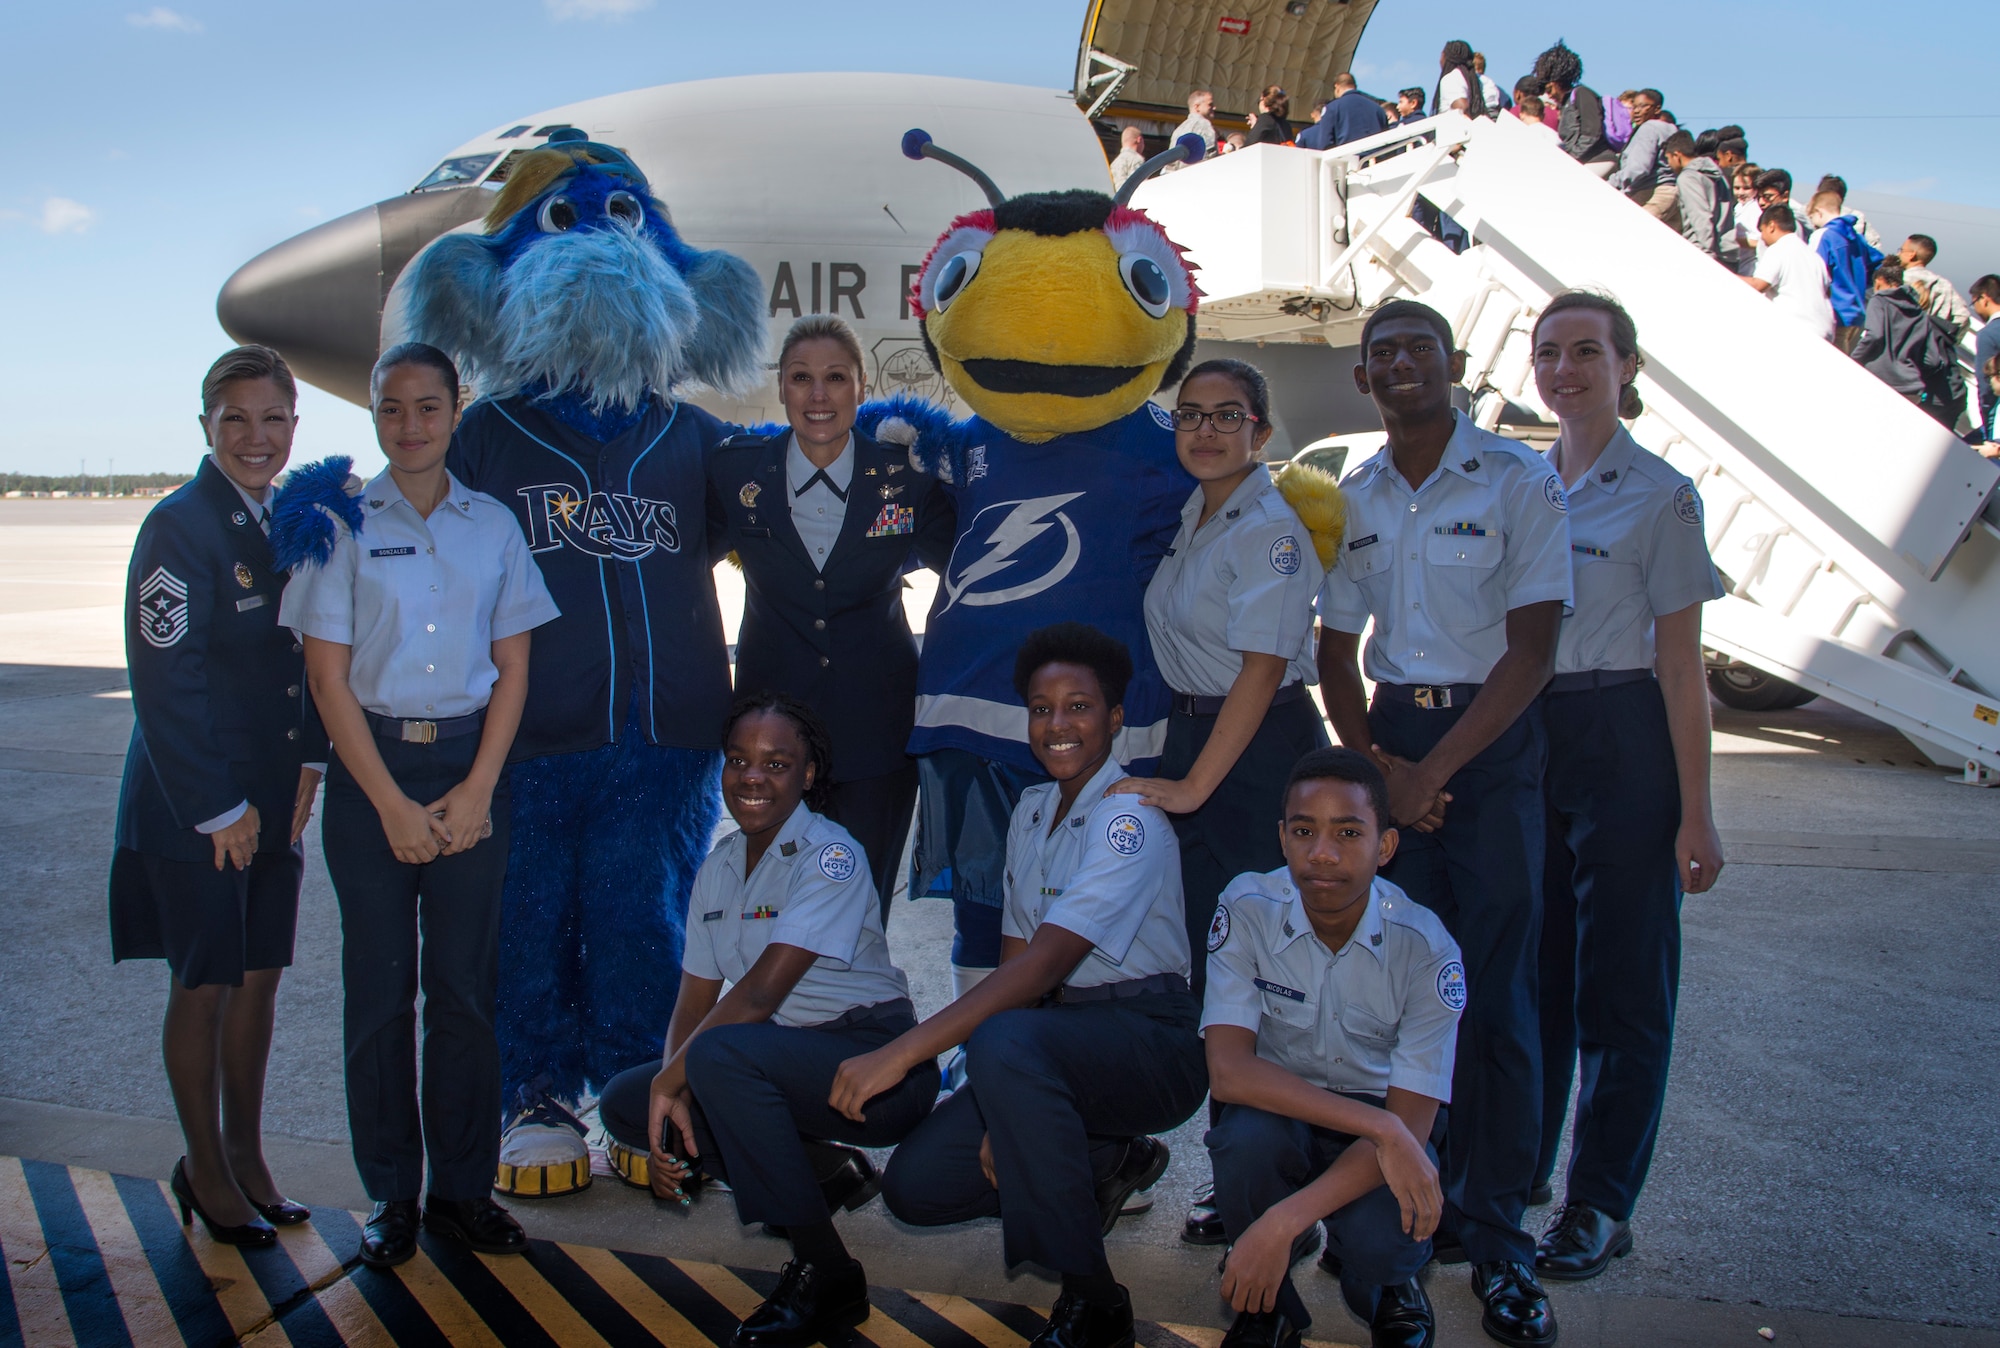 U.S. Air Force Col. April Vogel, the commander for the 6th Air Mobility Wing, pauses for a photo with students and Tampa Bay team mascots during the Science, Technology, Engineering, Arts and Math (STEAM) Day at MacDill Air Force Base, Fla., March 21, 2018.